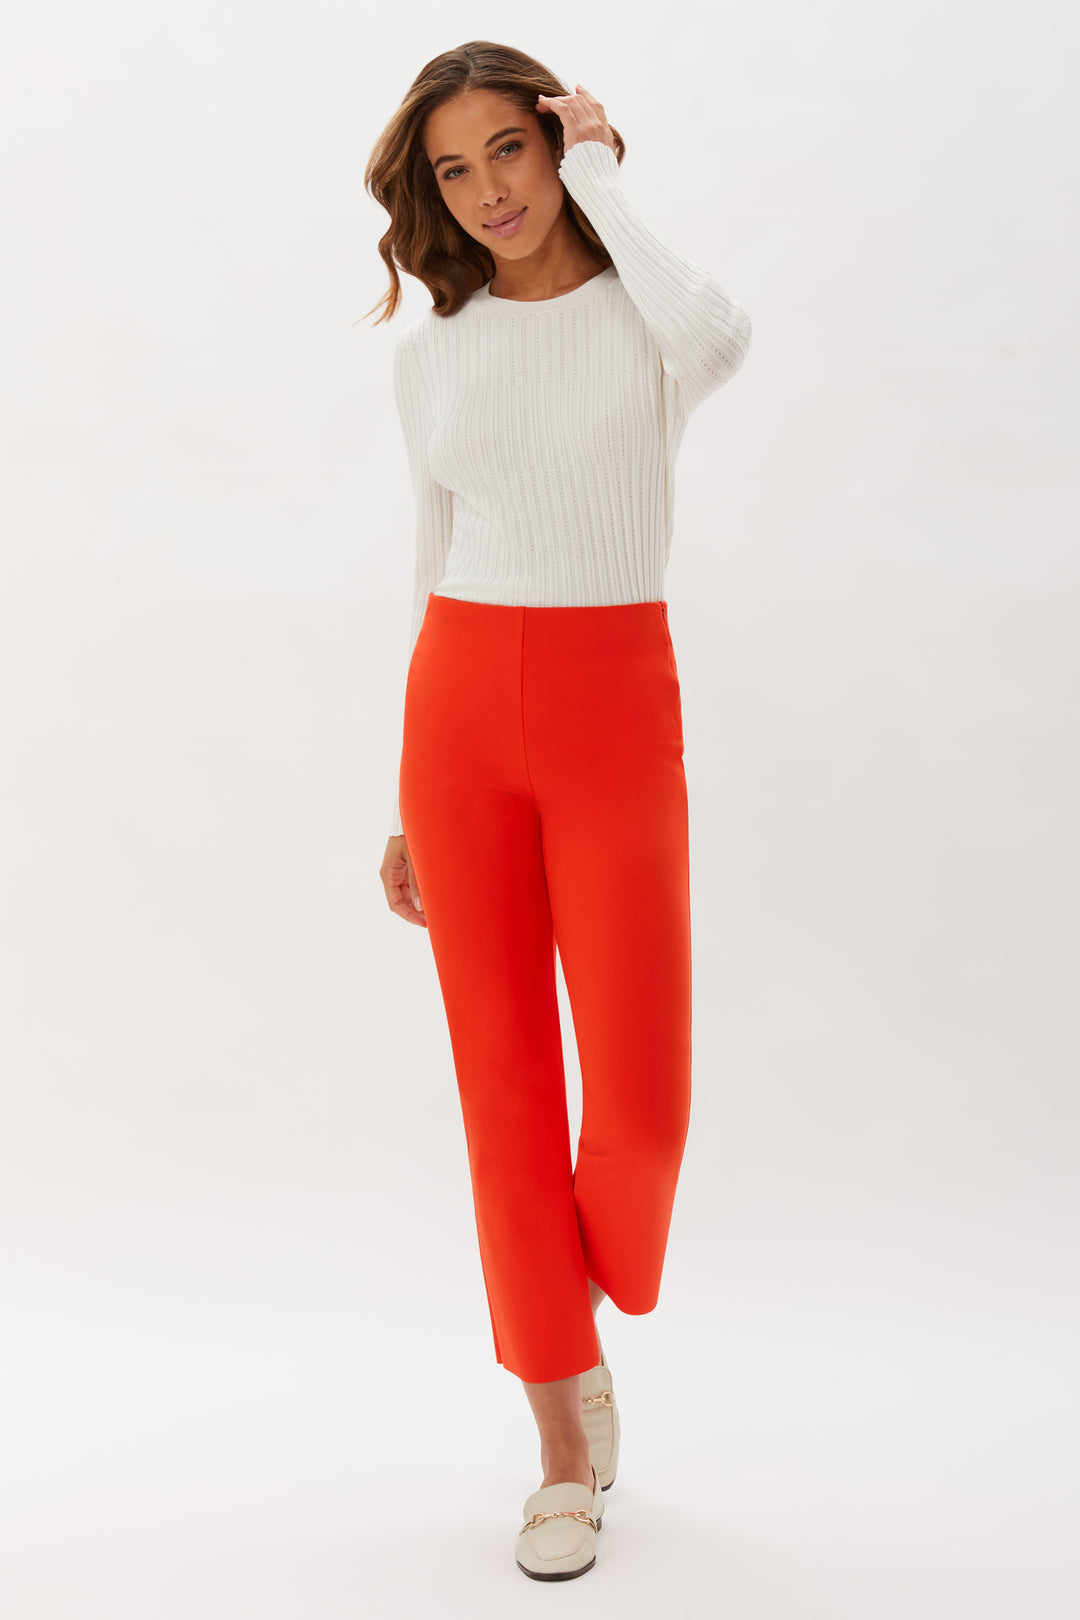 Prince Crop Flare Pant - Poppy